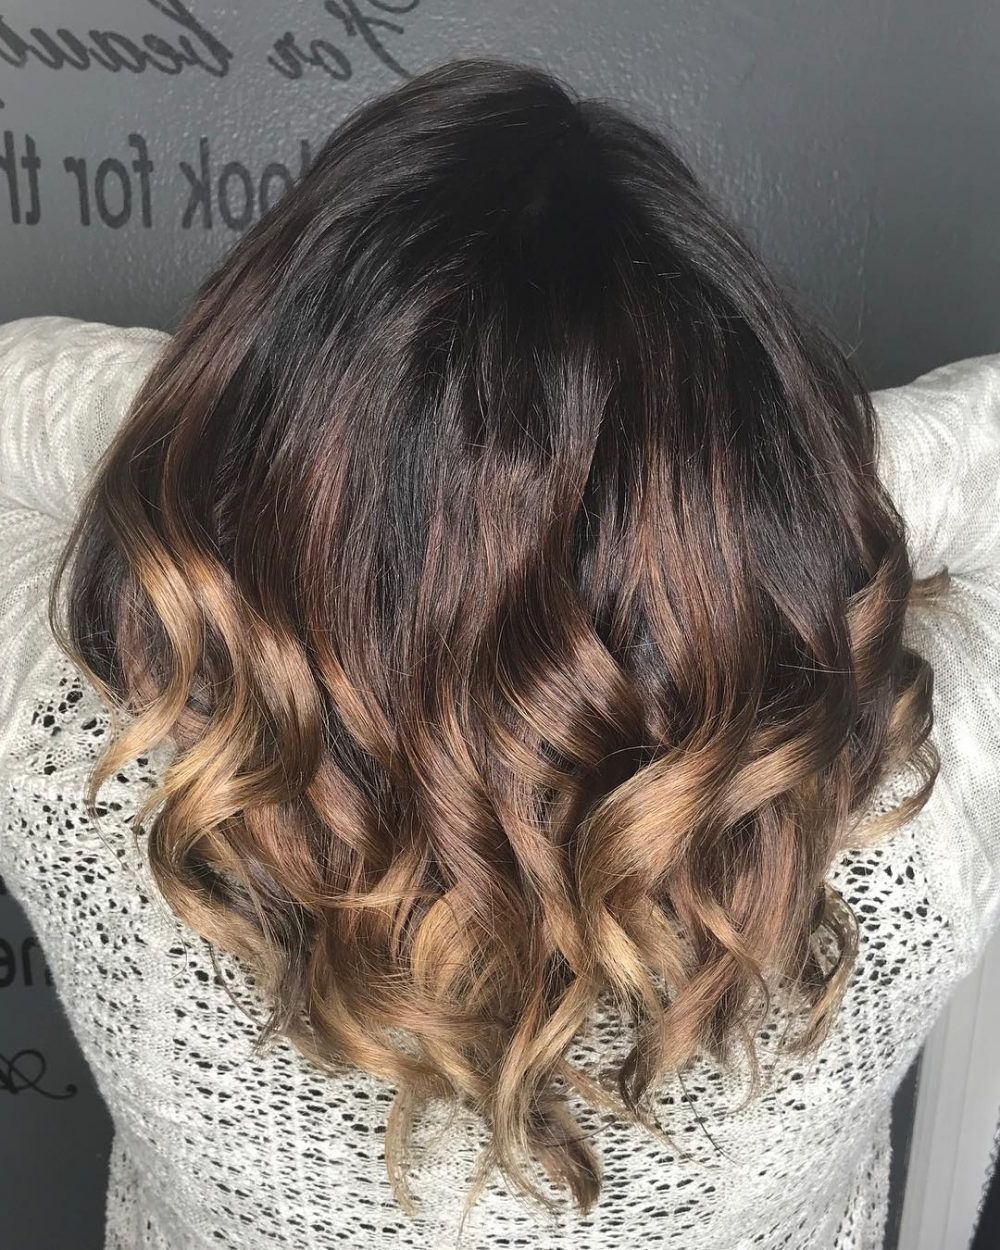 36 Top Short Ombre Hair Ideas Of 2018 Throughout Short Curly Caramel Brown Bob Hairstyles (View 10 of 20)